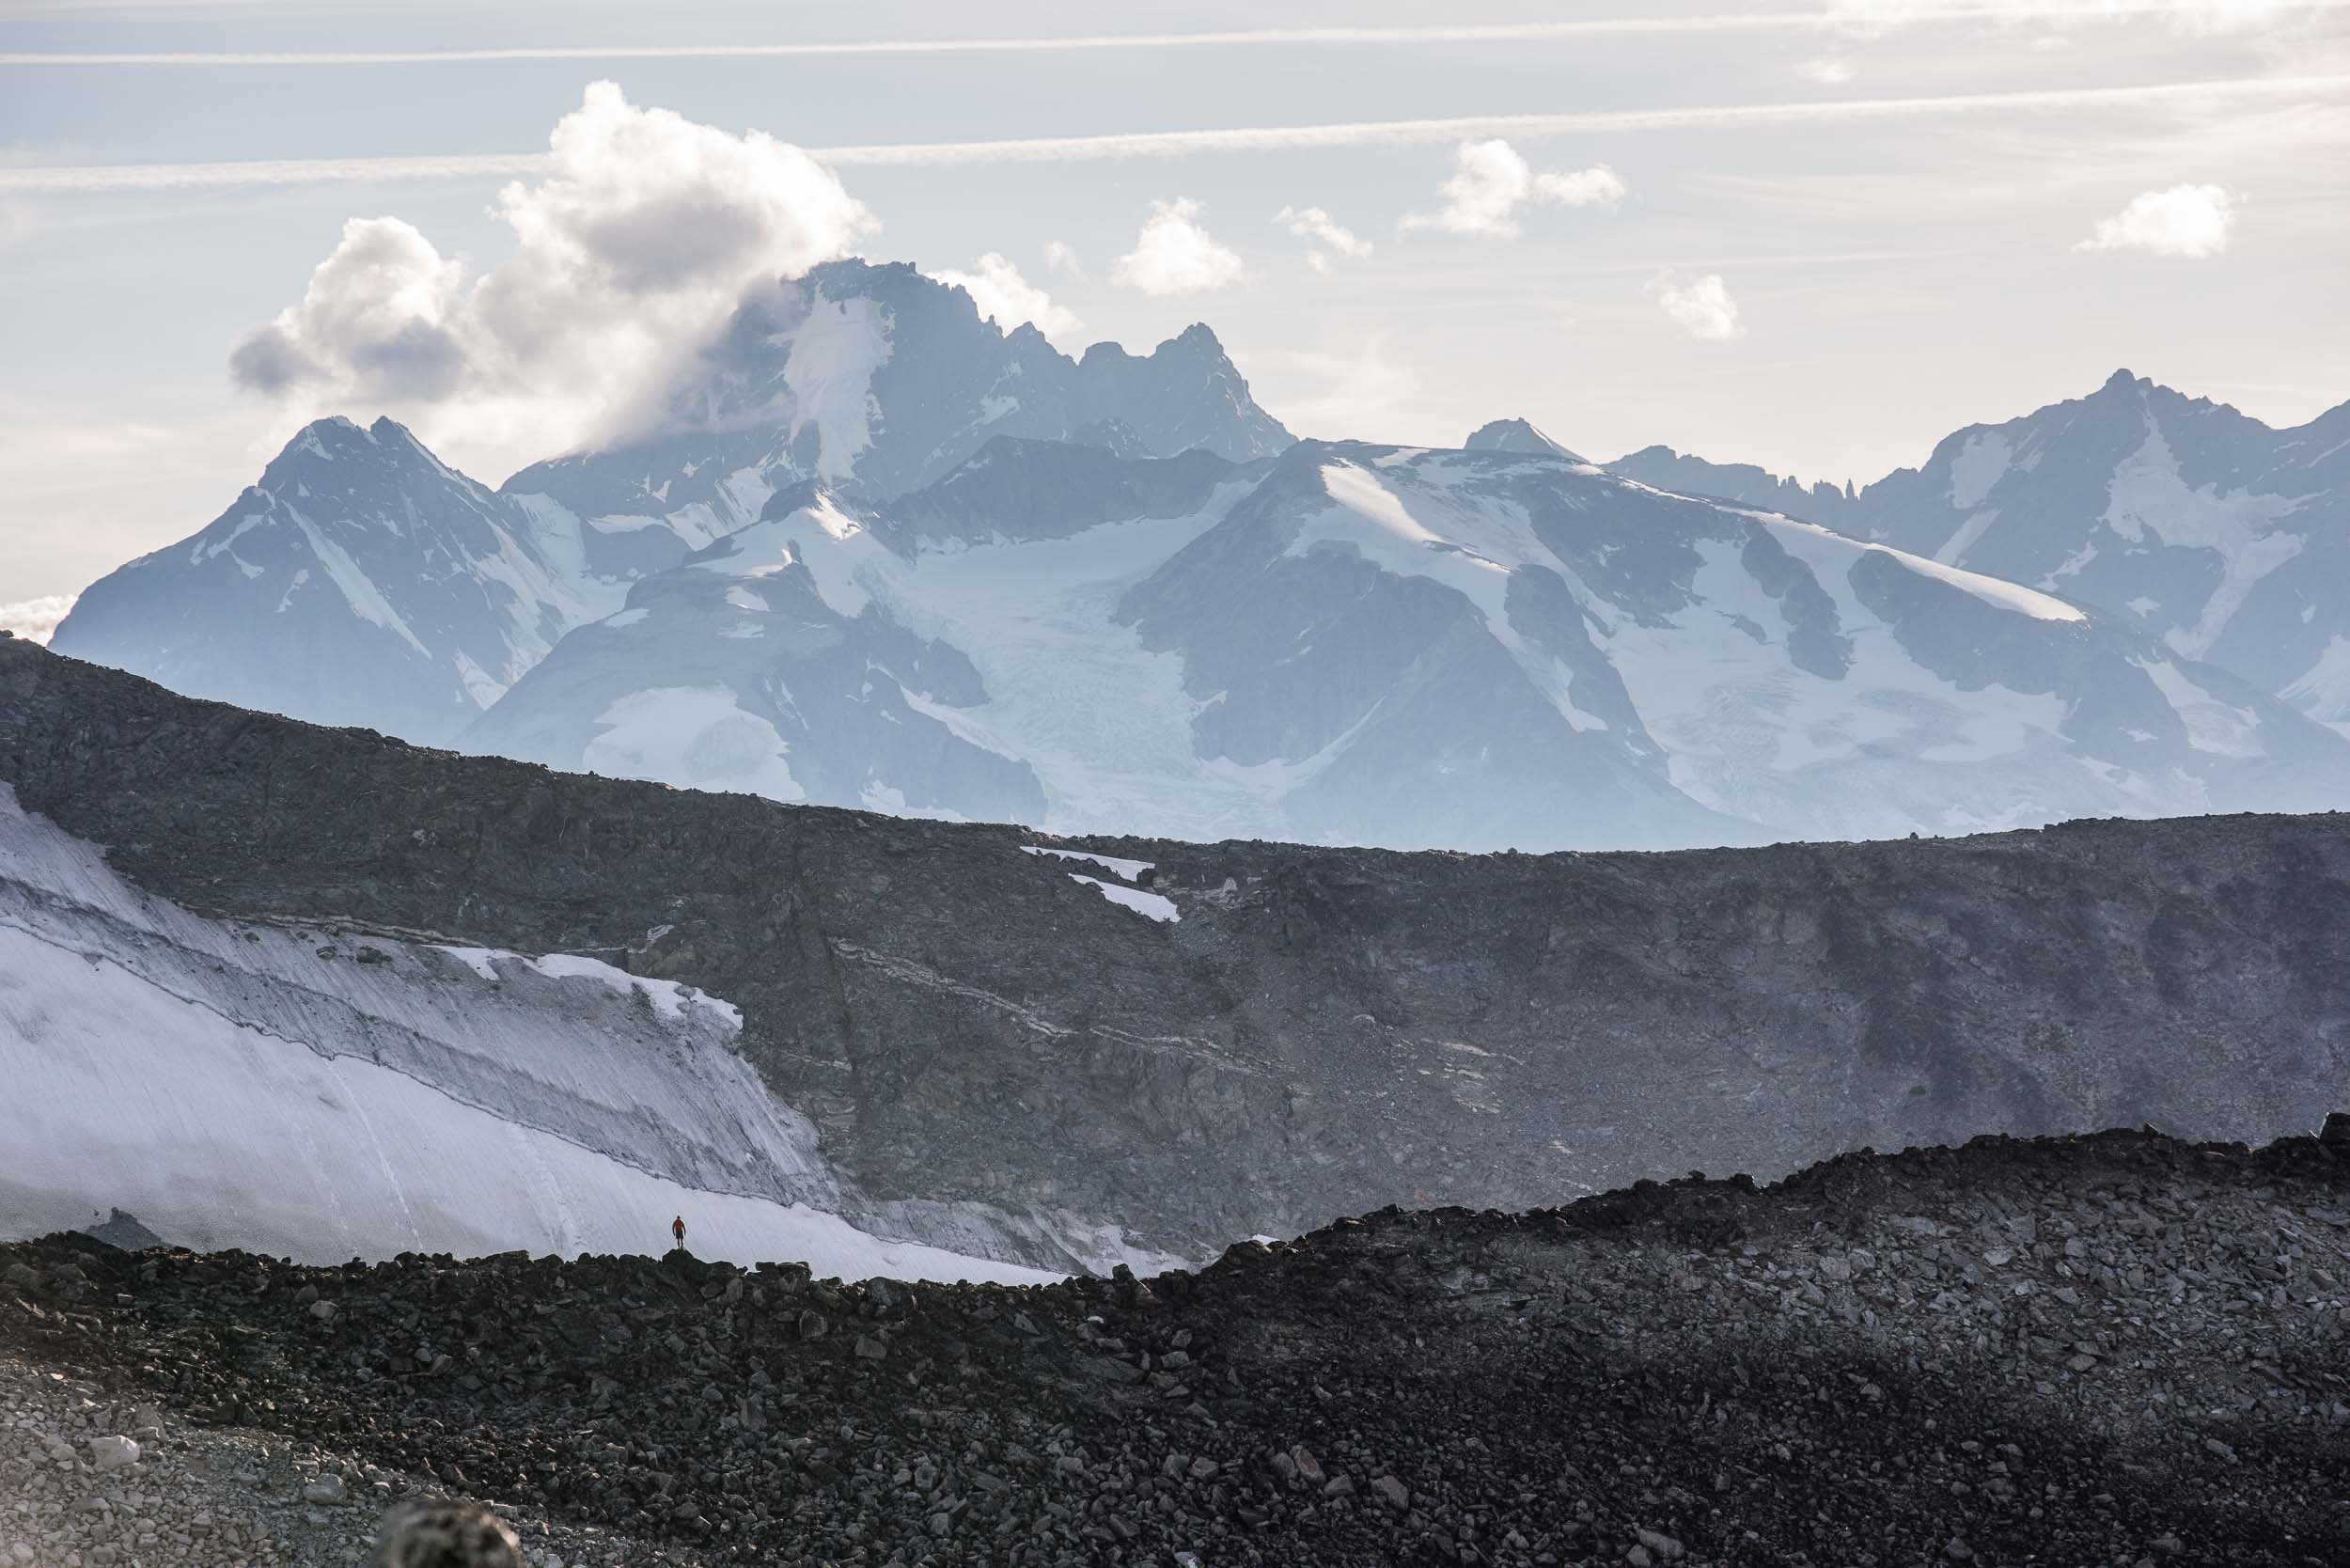 View of Coast Mountains from plateau above Wilderness Lake. Credit: Destination BC/Kari Medig